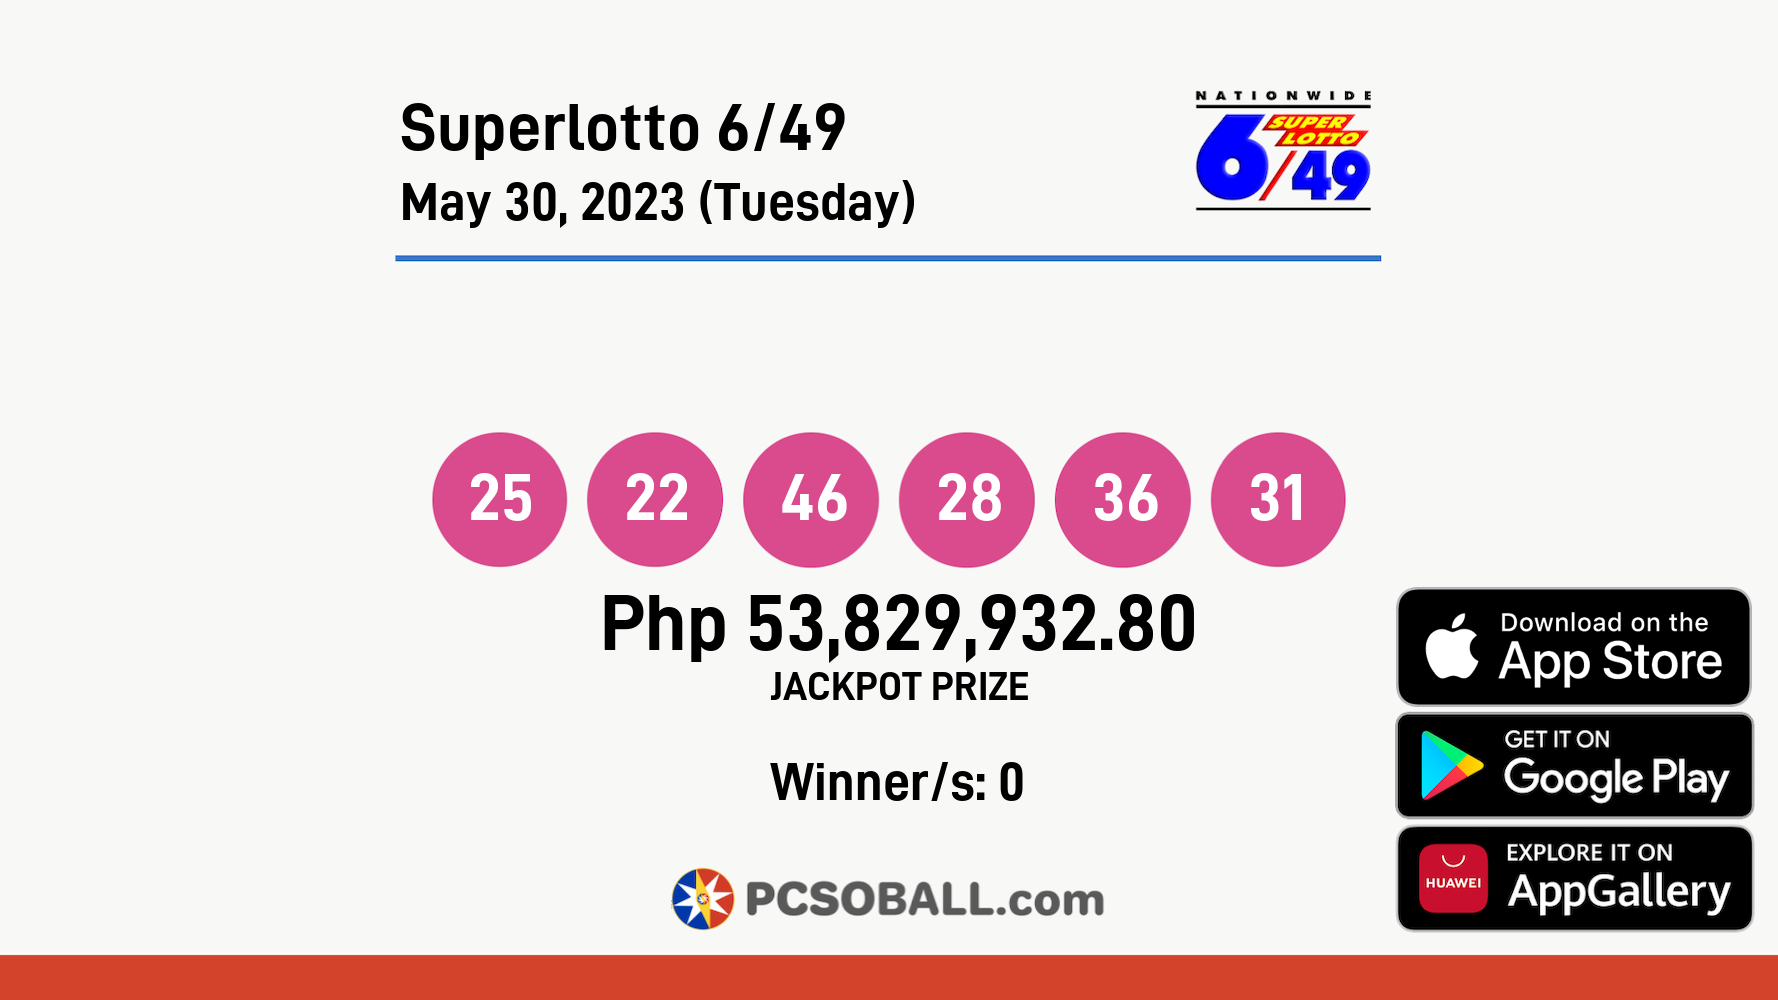 Superlotto 6/49 May 30, 2023 (Tuesday) Result